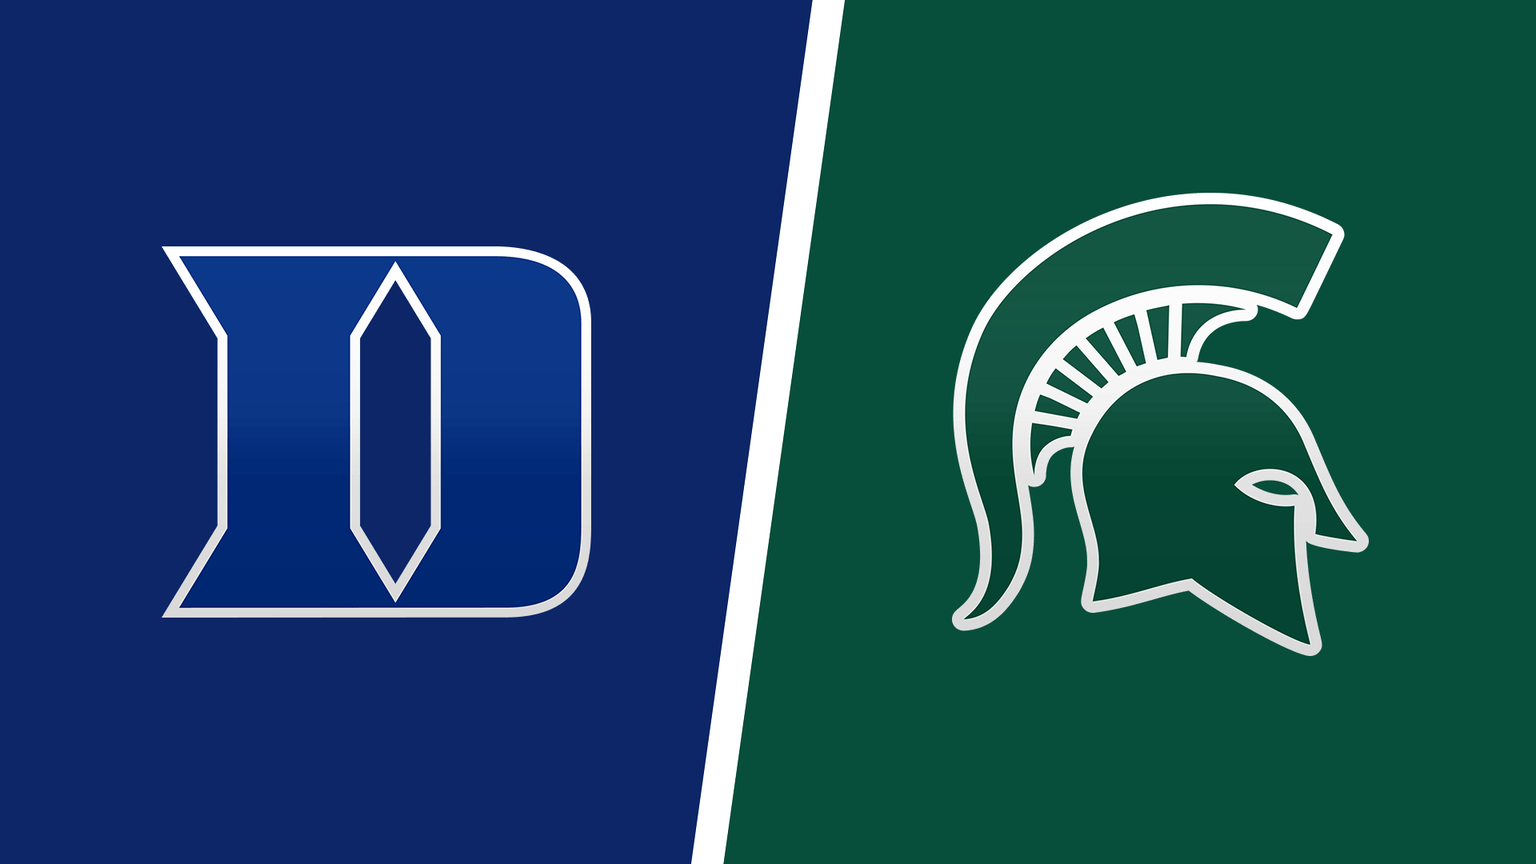 How to Watch Michigan State vs. Duke Game Live Online on March 20, 2022